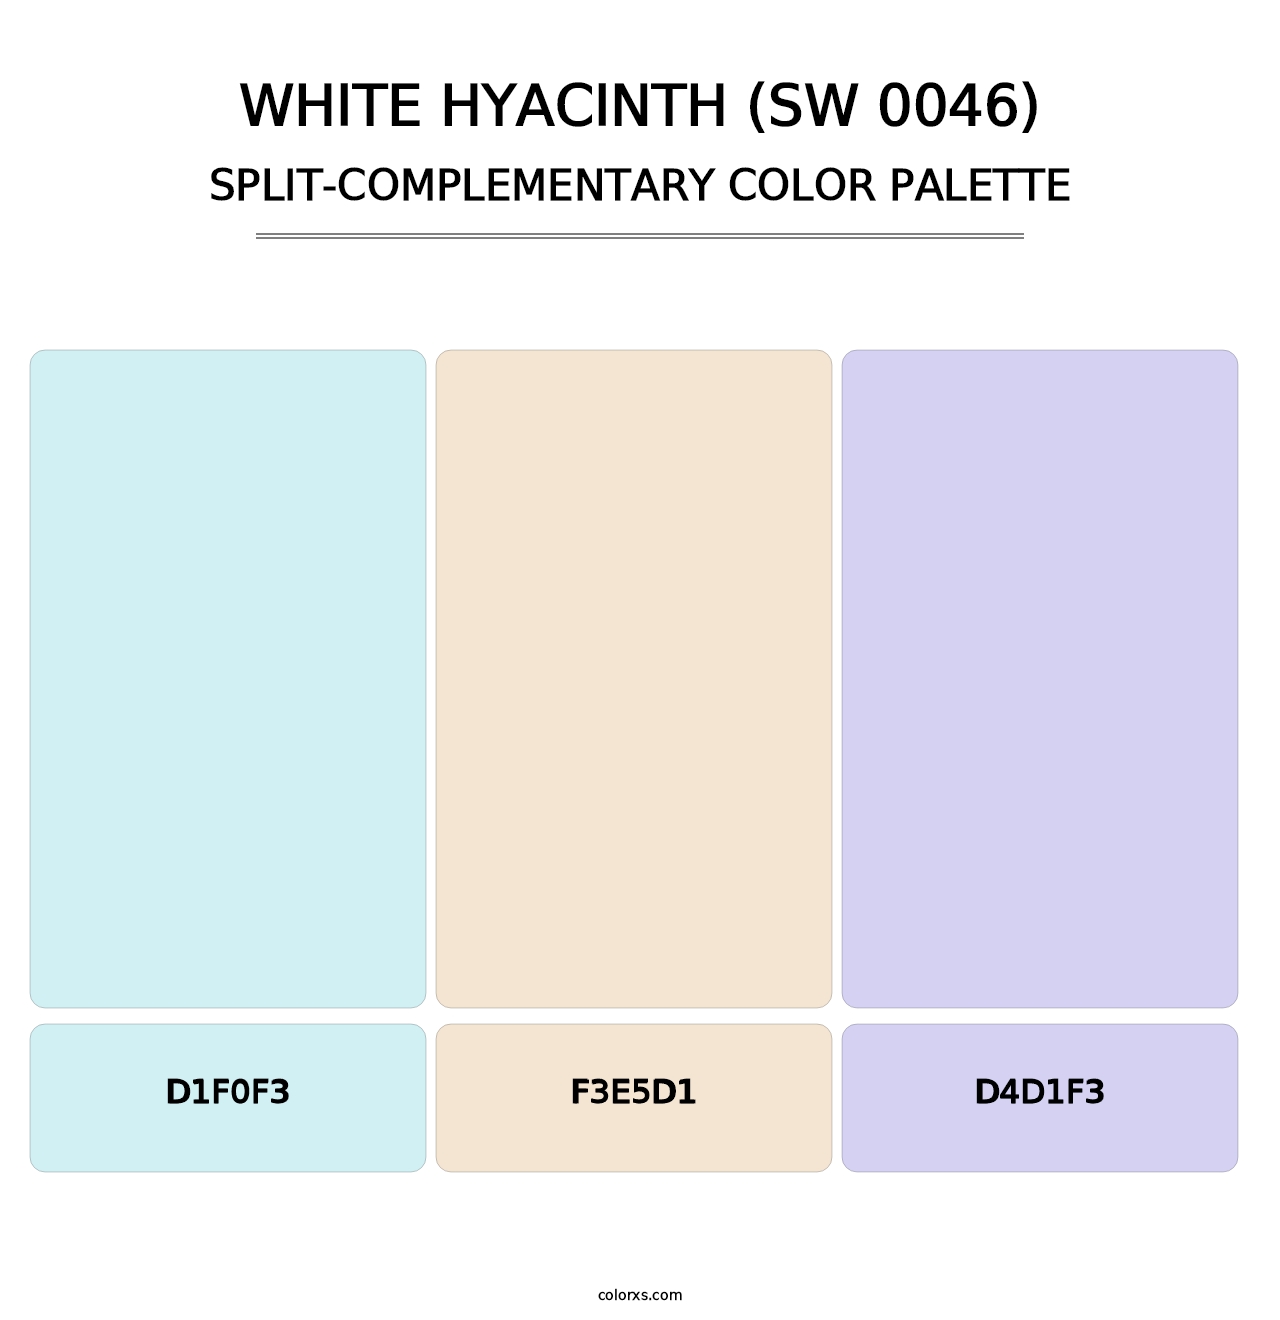 White Hyacinth (SW 0046) - Split-Complementary Color Palette